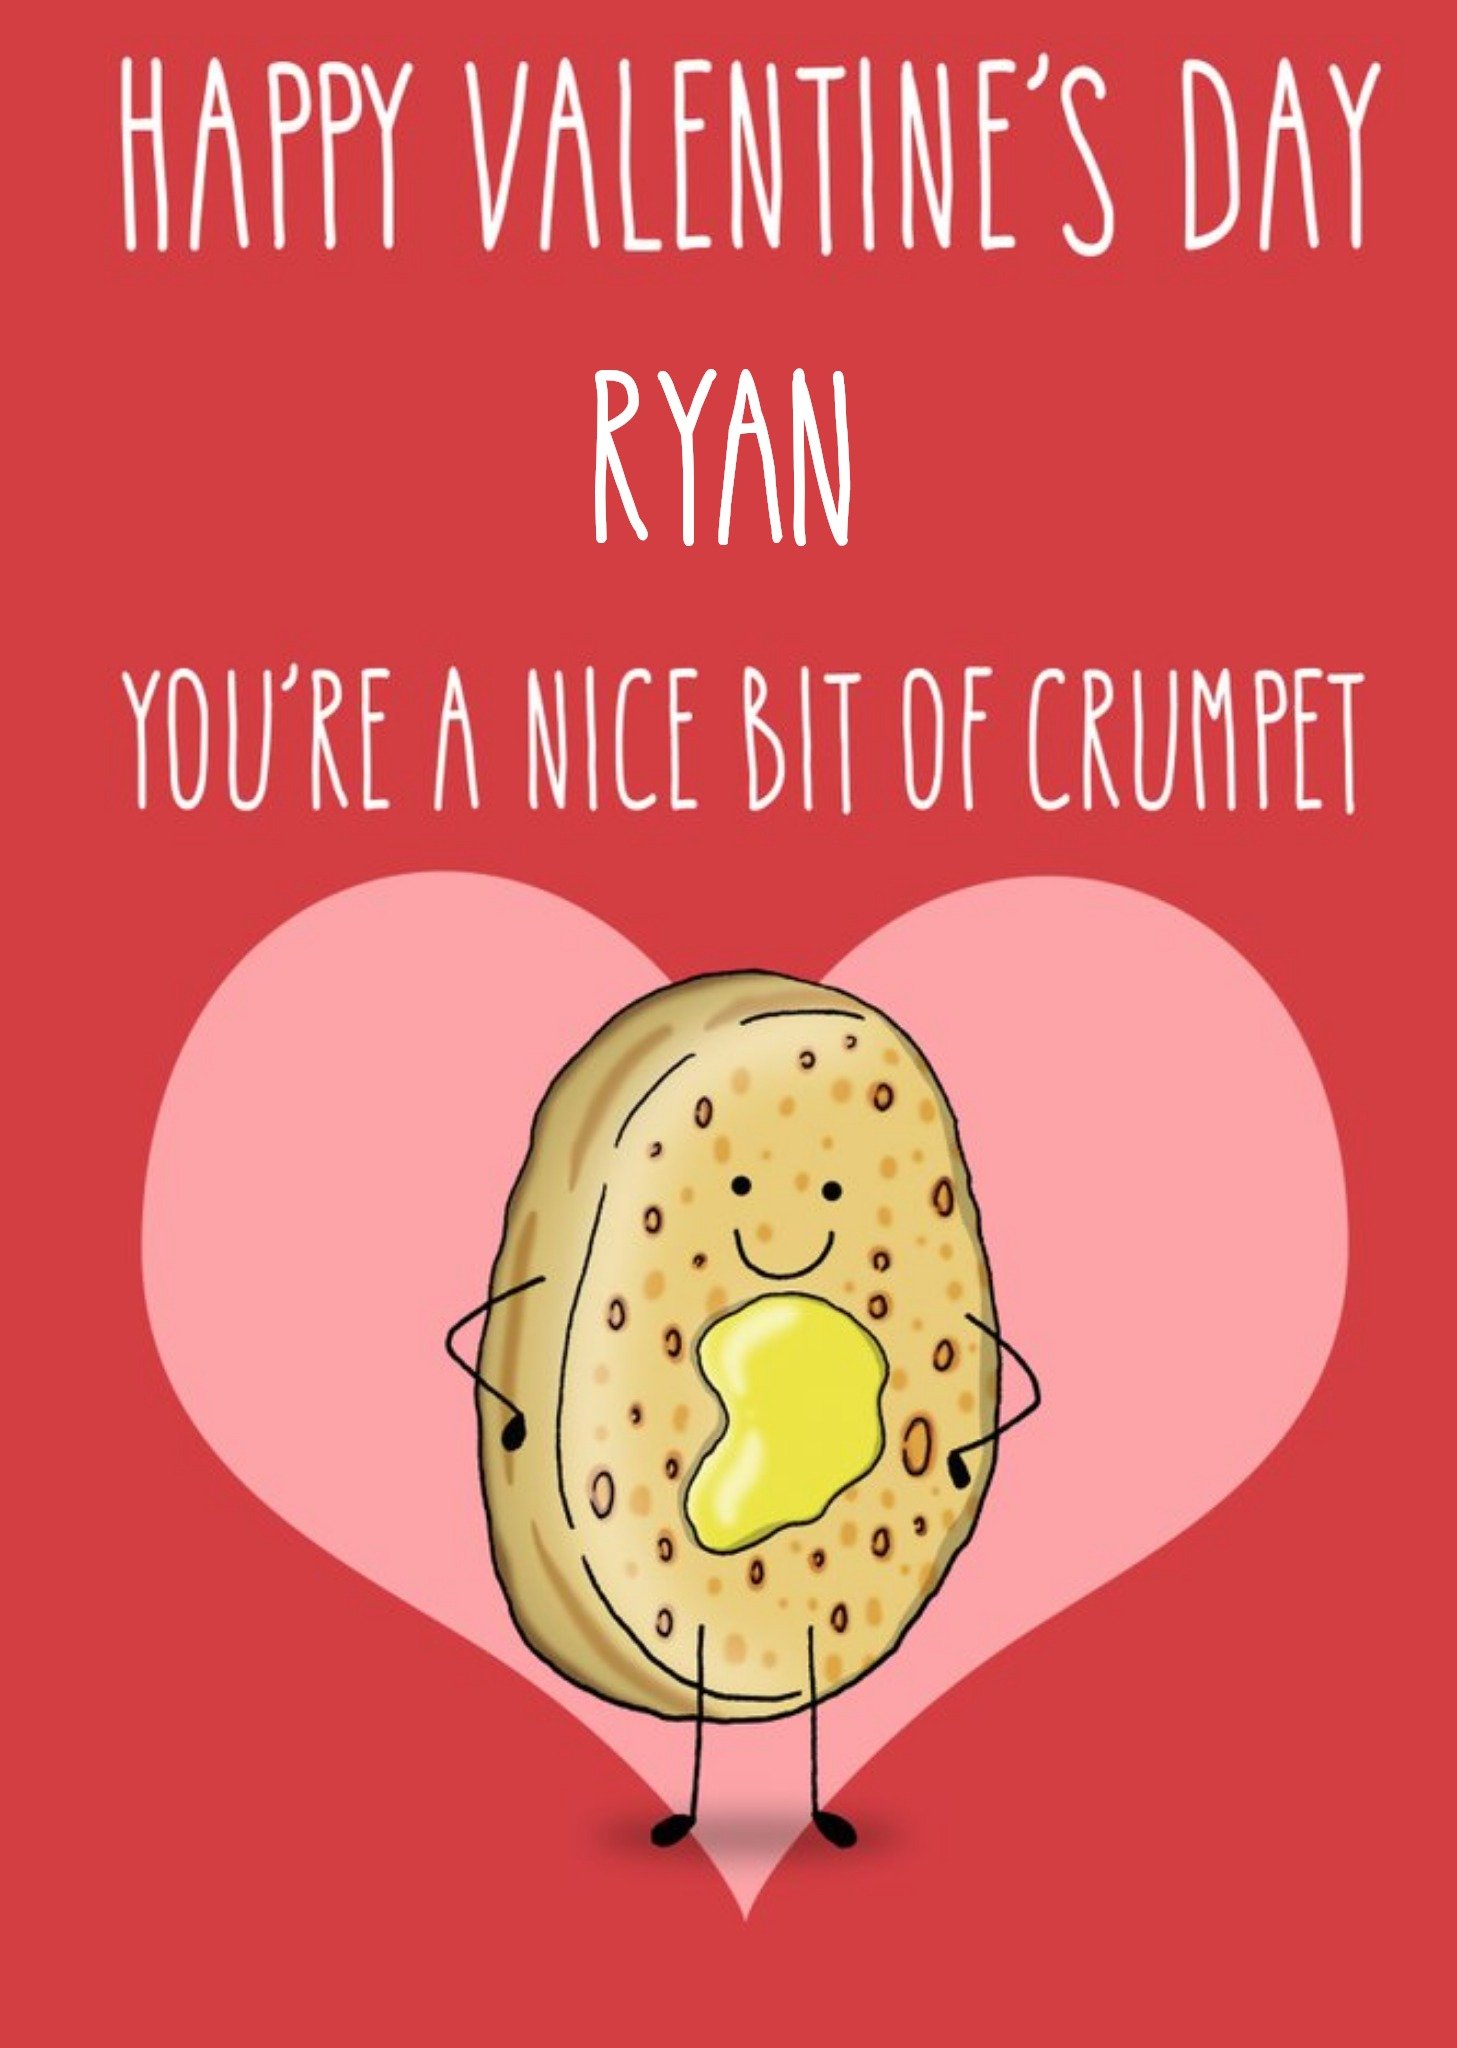 Moonpig Illustration Of Buttered Crumpet. You're A Nice Bit Of Crumpet Valentine's Day Card, Large